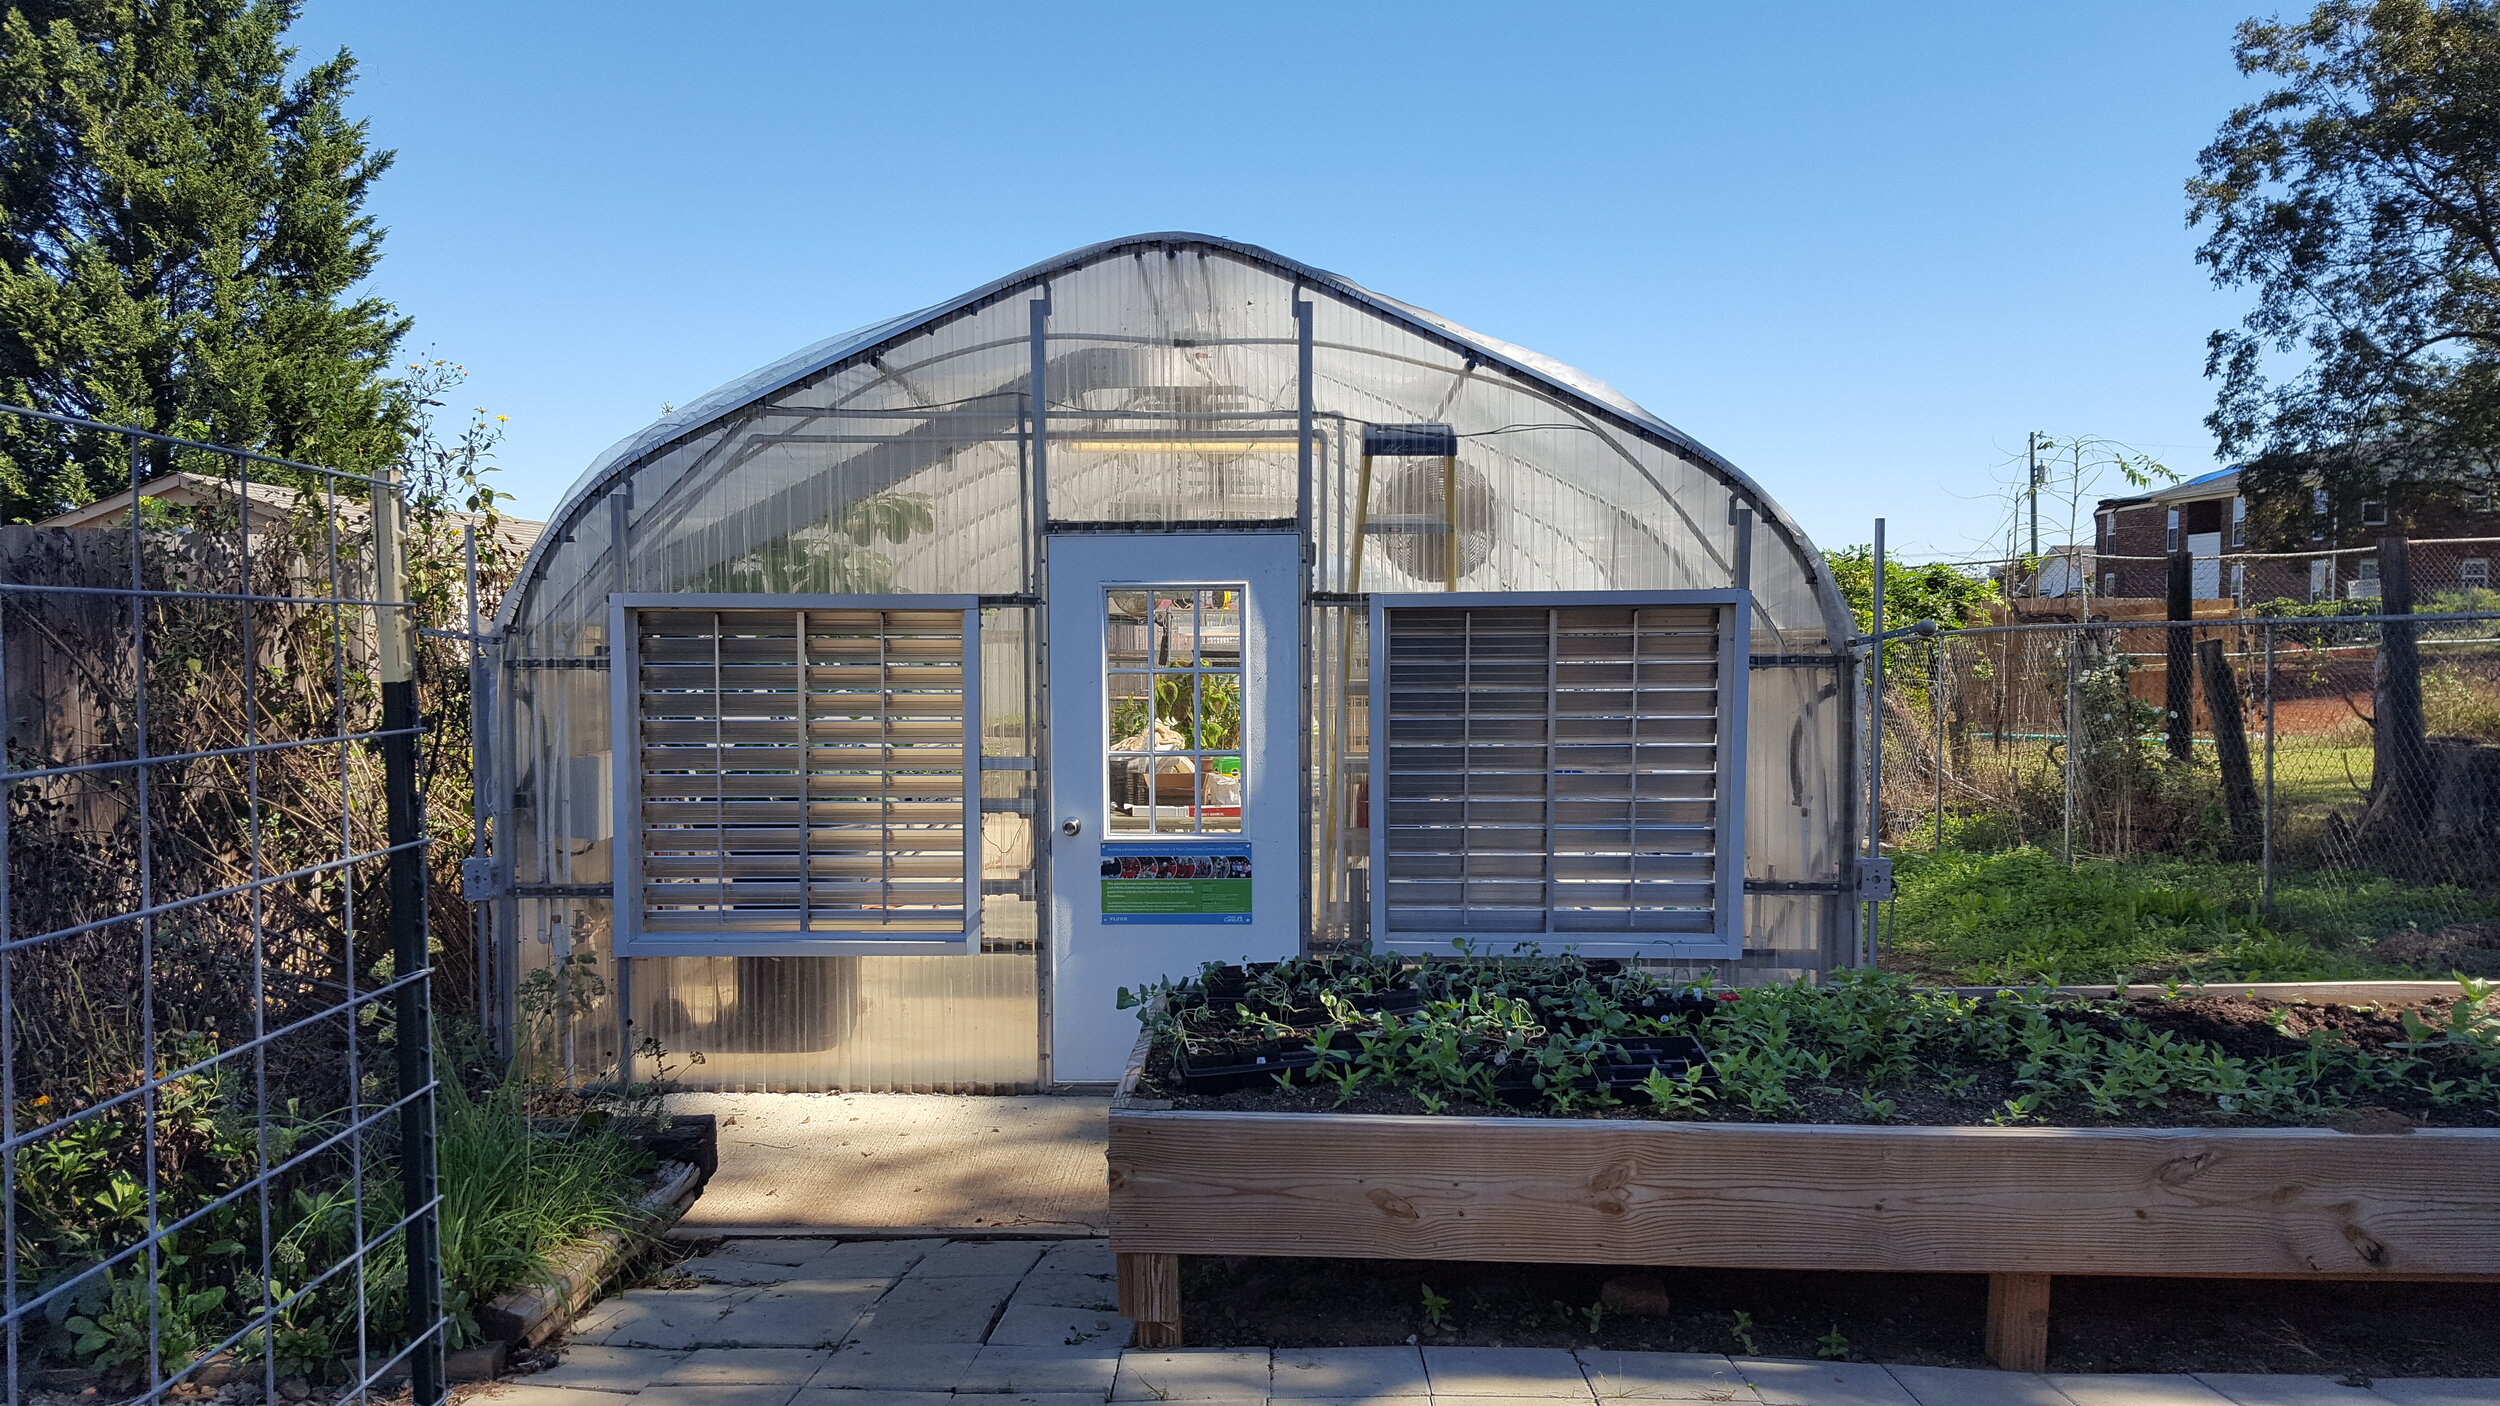  The Gardening for Good greenhouse, made possible by Fluor. 